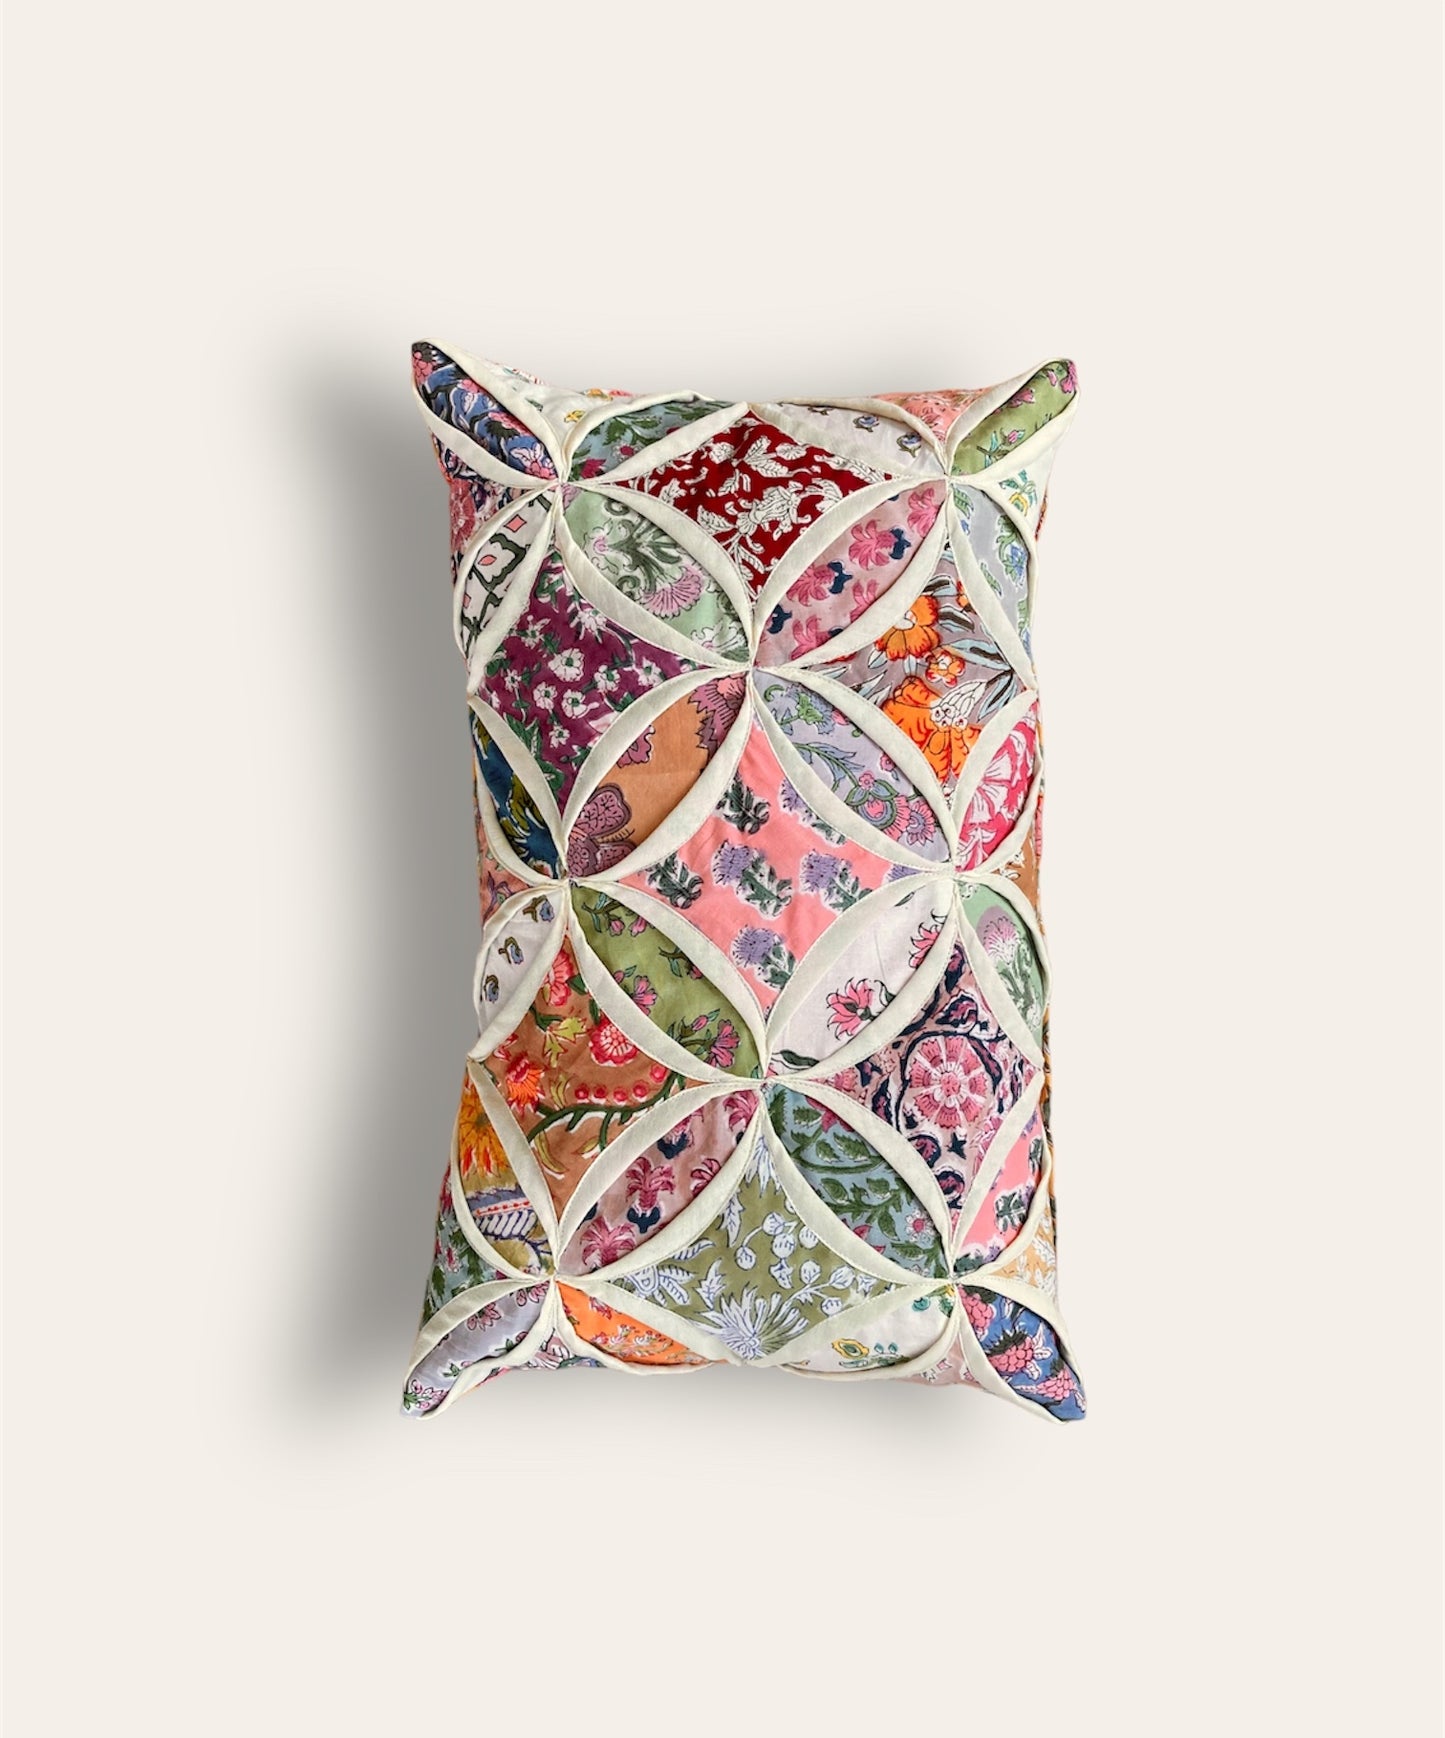 Hand Block Print Cathedral Window Patchwork Cushion Cover #cathdral-rec